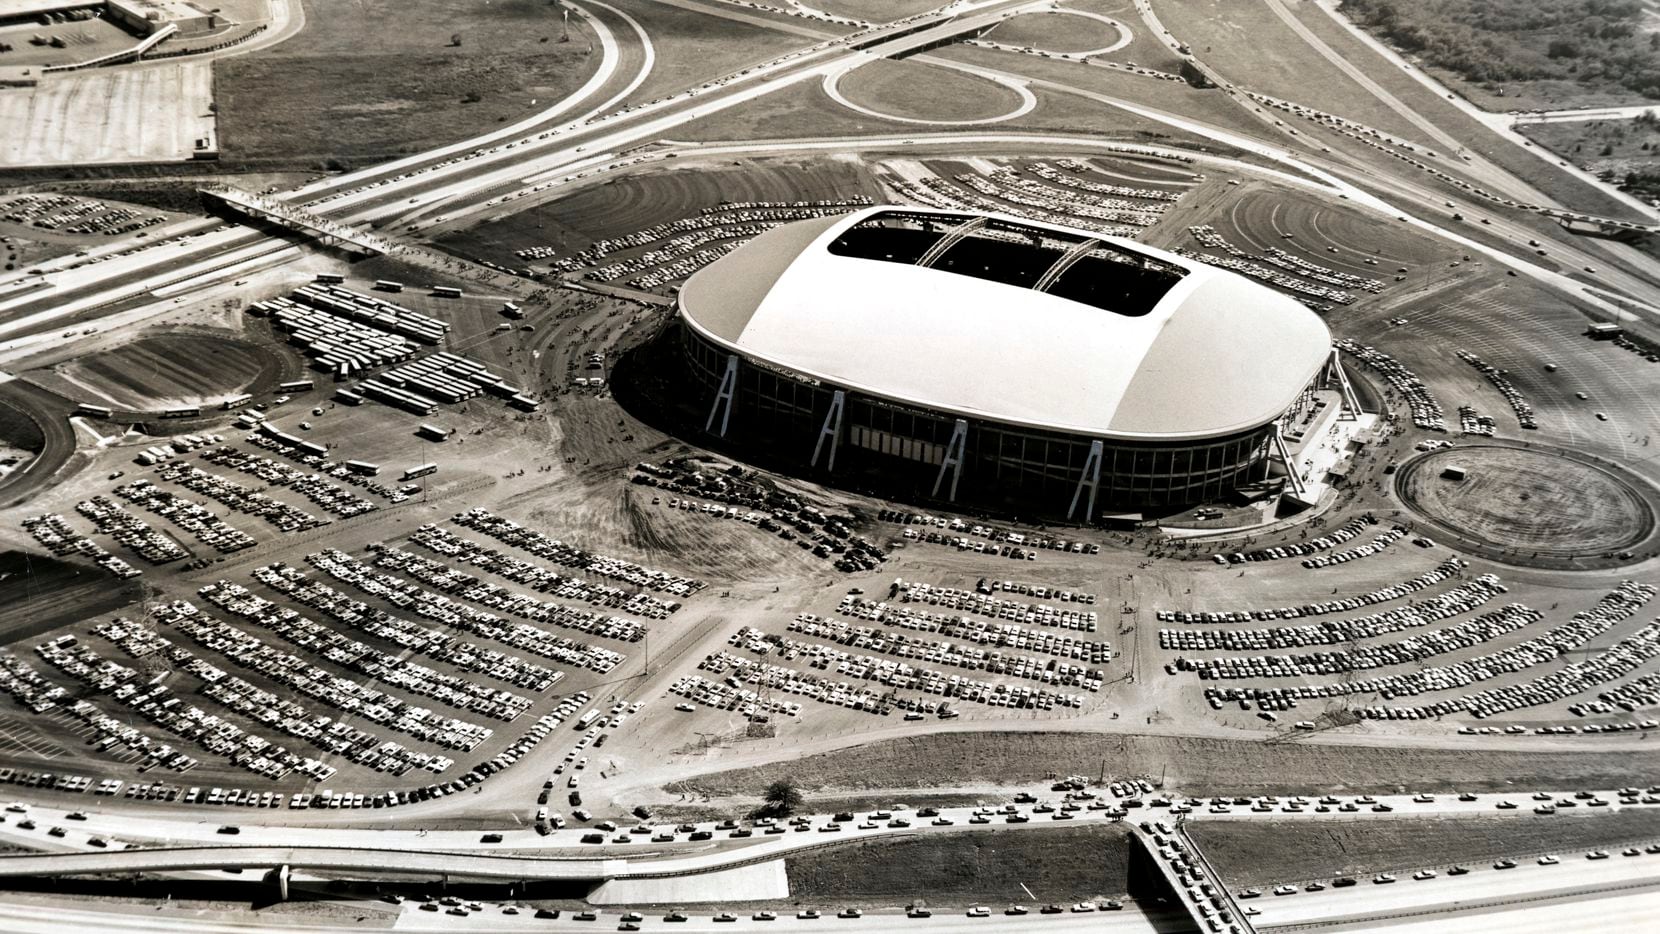 Texas Stadium, long before its implosion in 2010, is seen in this file photo from 1971....